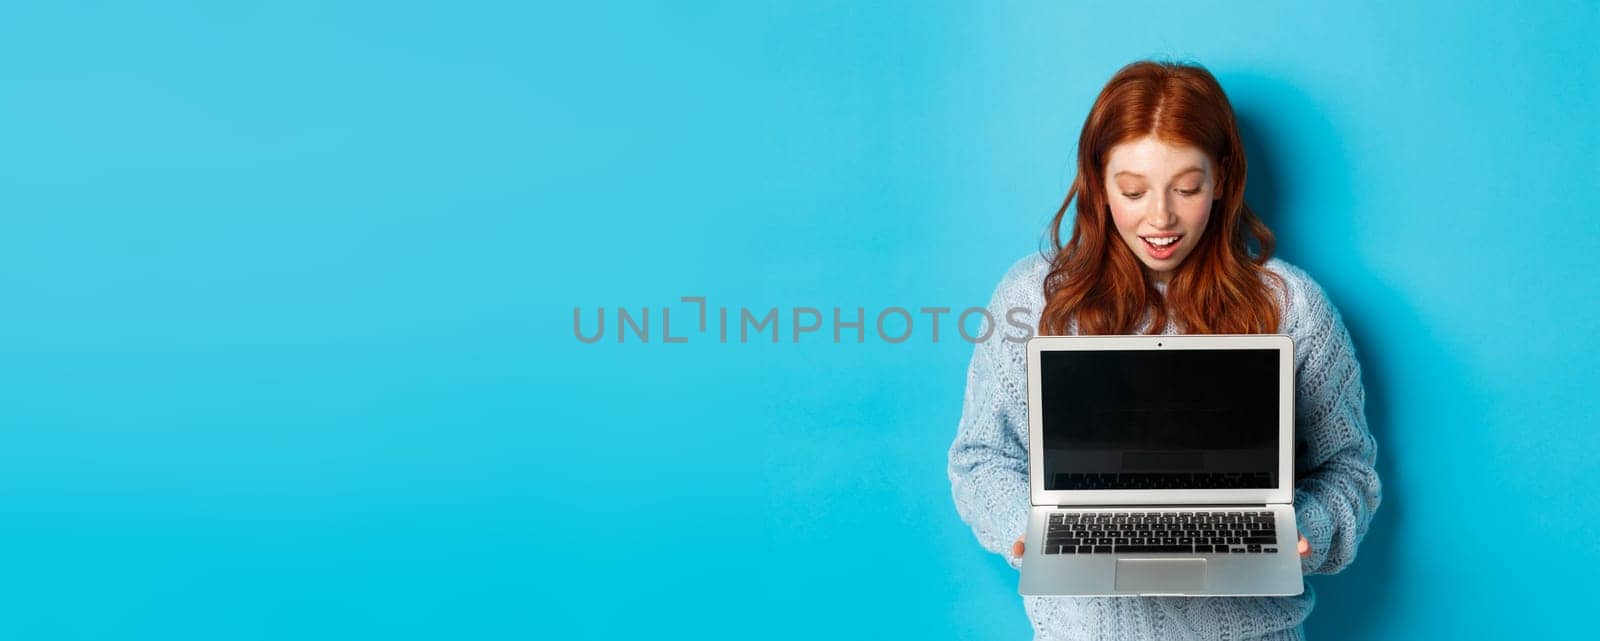 Amazed redhead girl staring at laptop screen and looking impressed, showing computer display, standing over blue background.